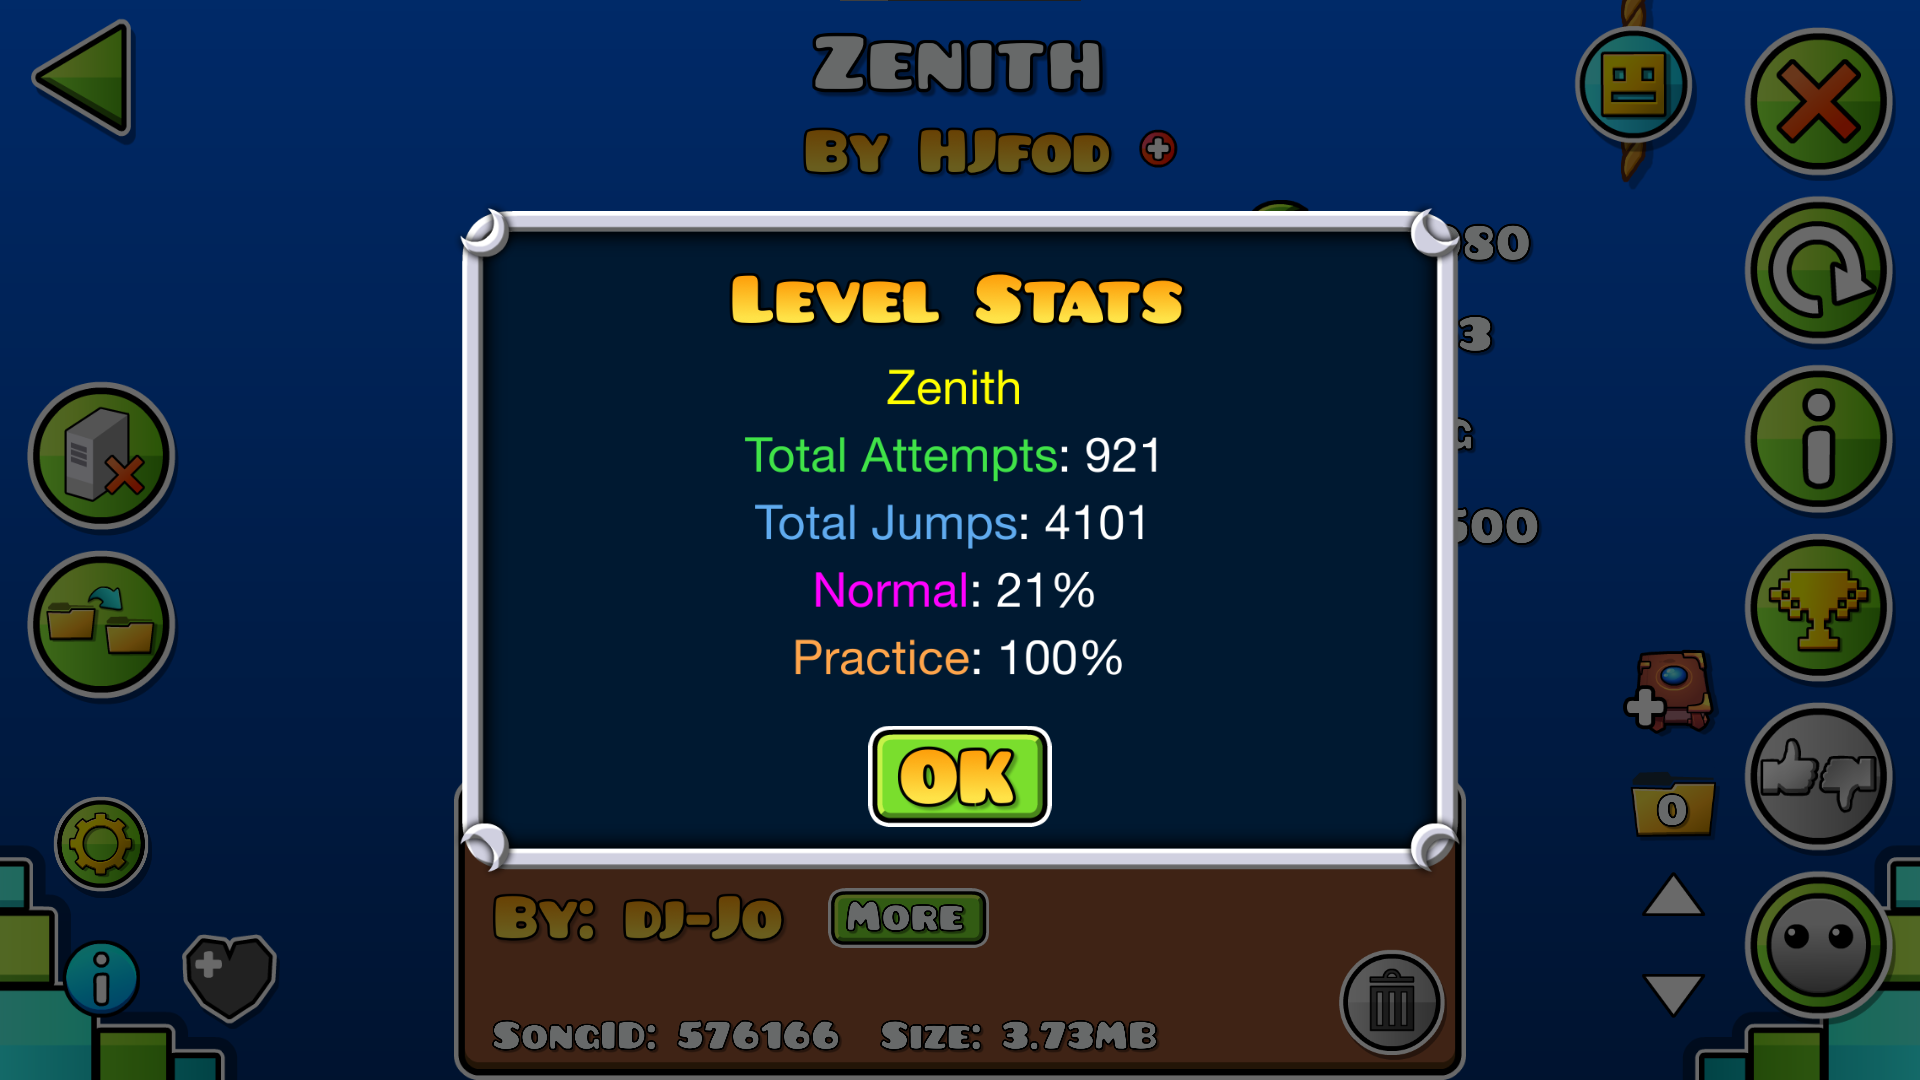 Level statistics popup for Zenith by HJfod